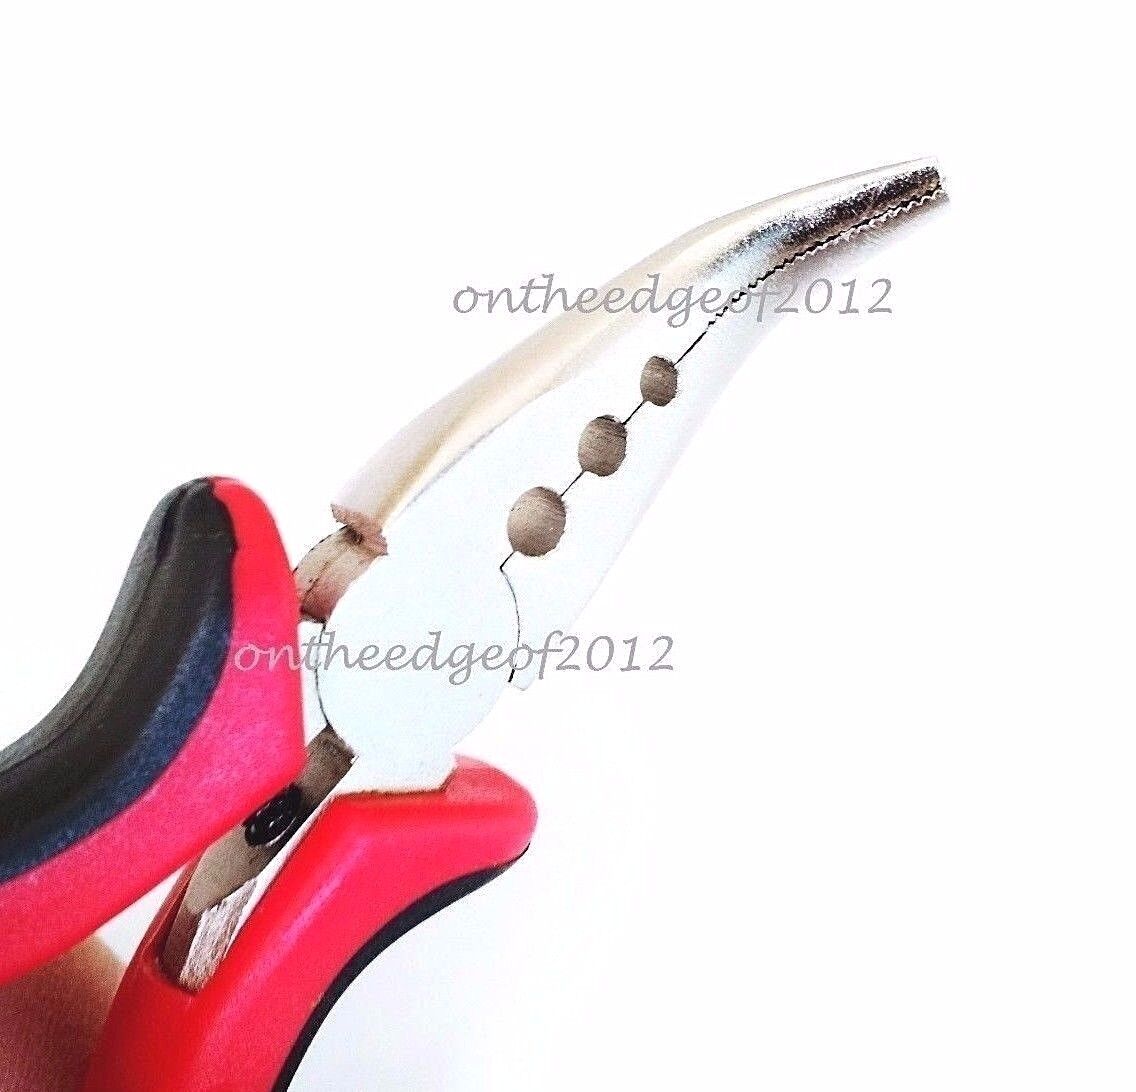 200 Silicone MICRO Rings BEADS Hair Extension Tools KIT-  Pliers,Loop,Hook.I-Tip - Simpson Advanced Chiropractic & Medical Center